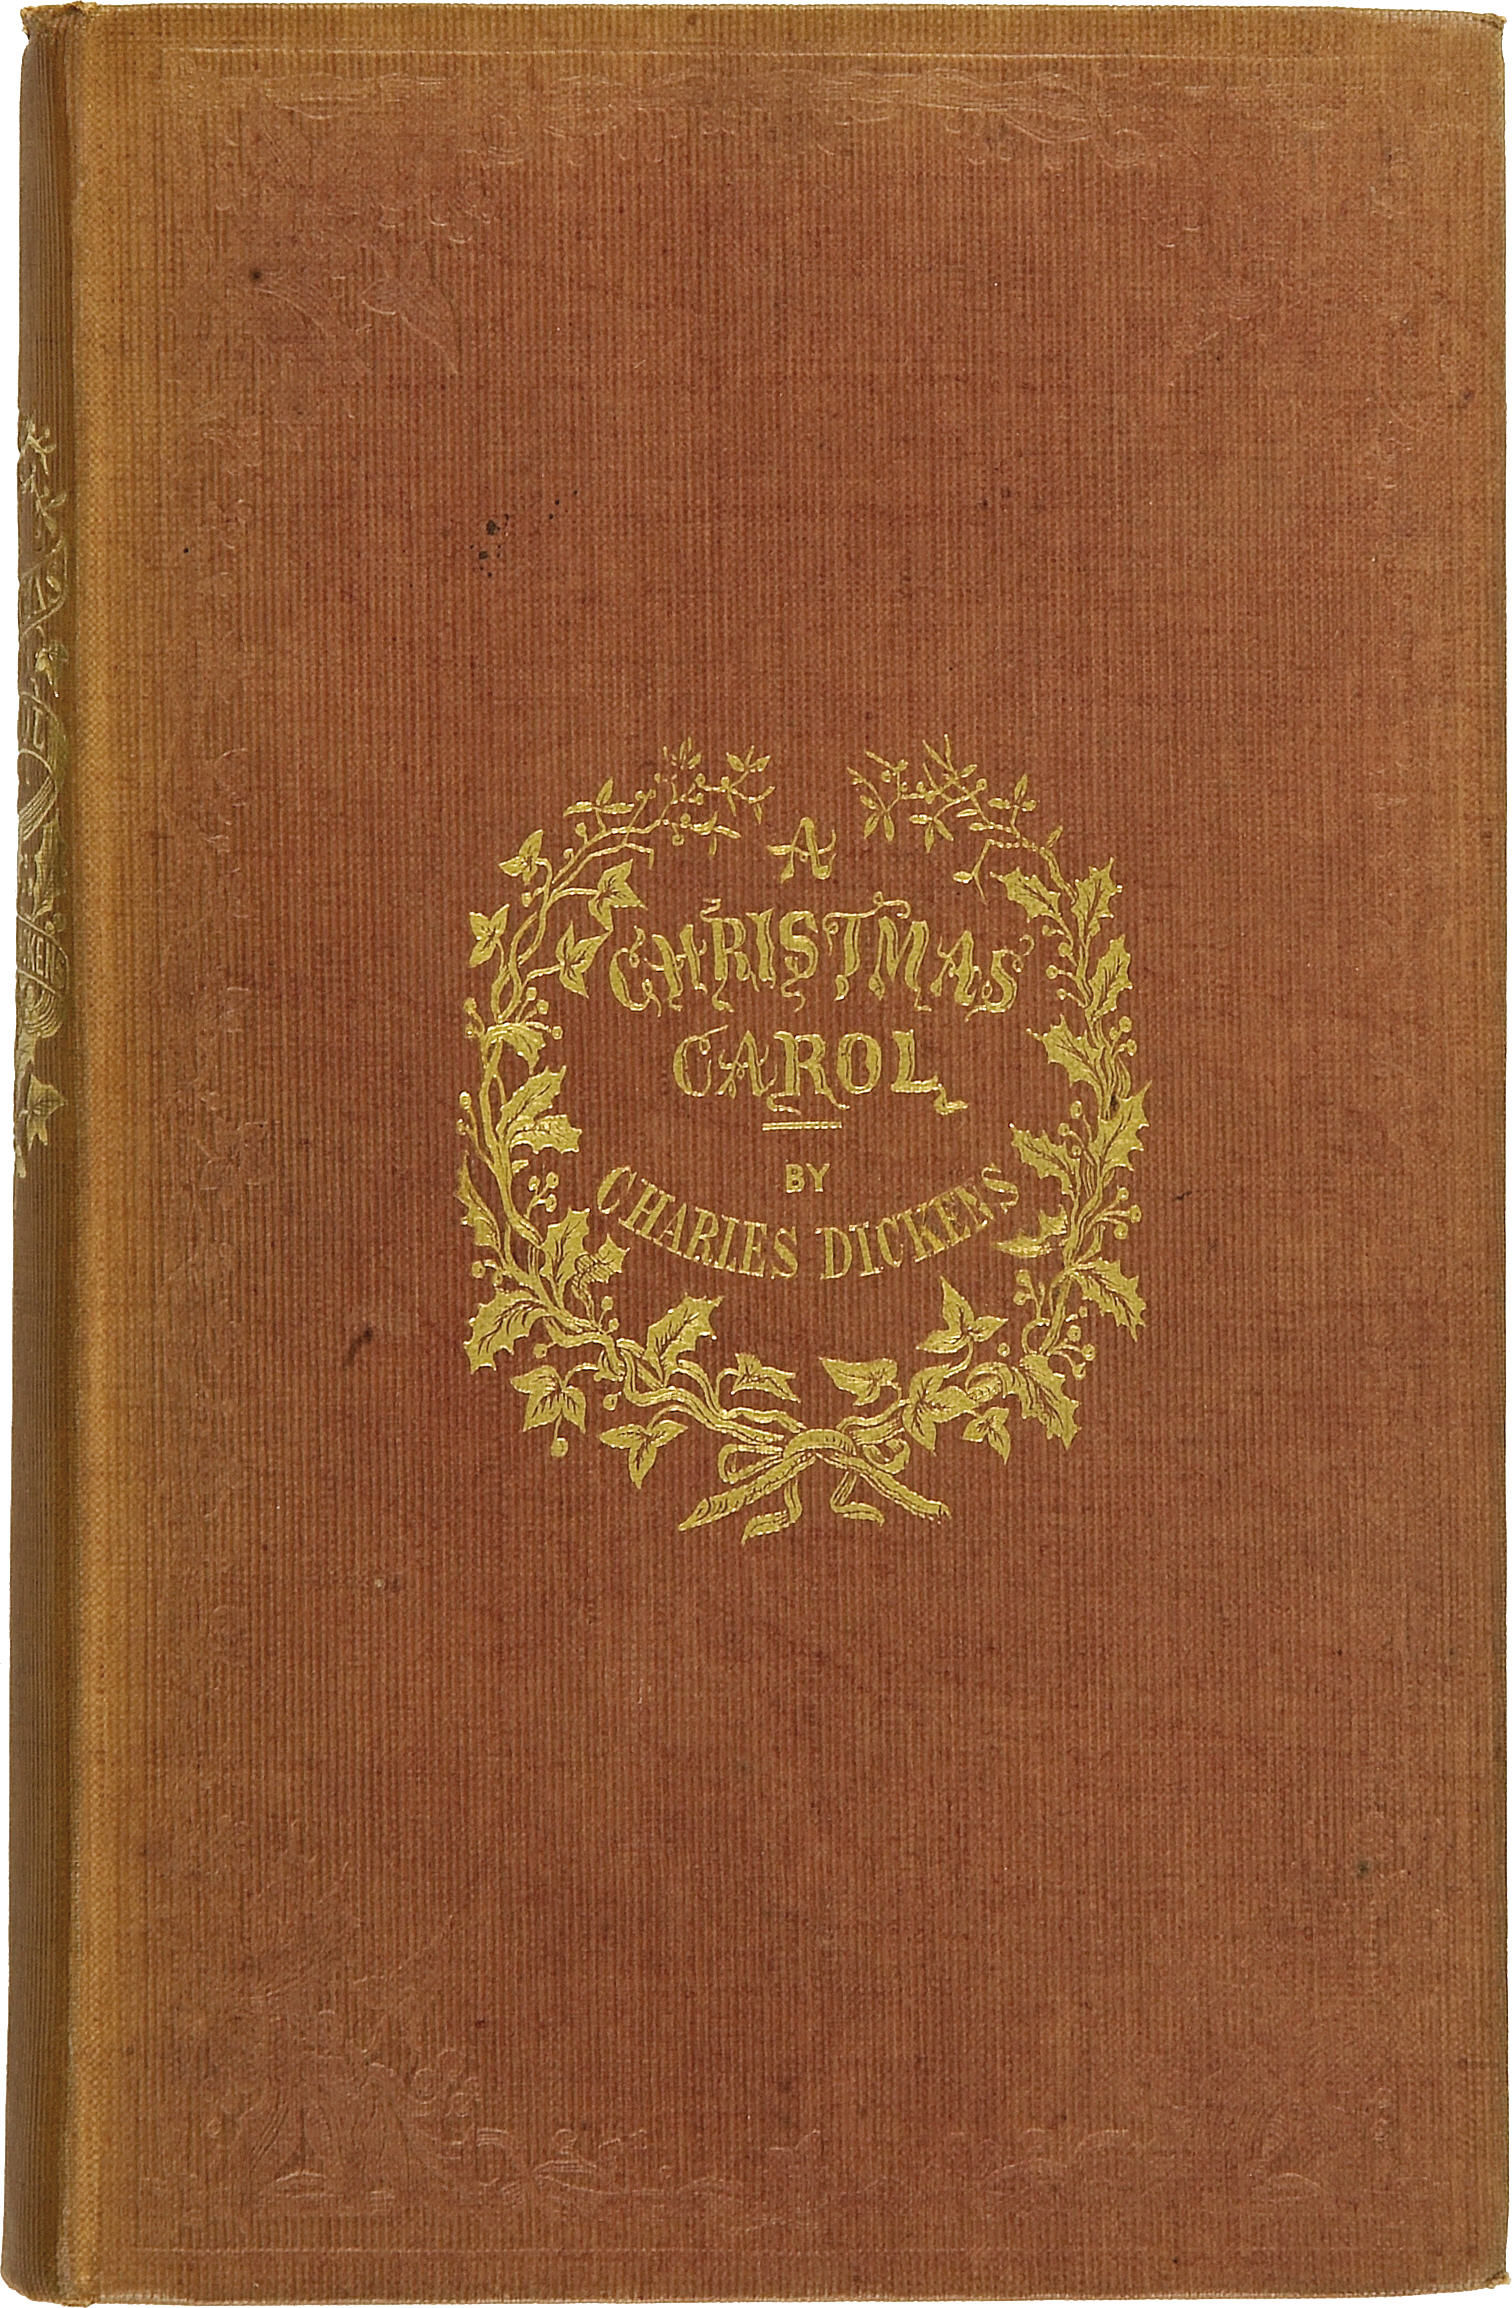 First Edition of A Christmas Carol